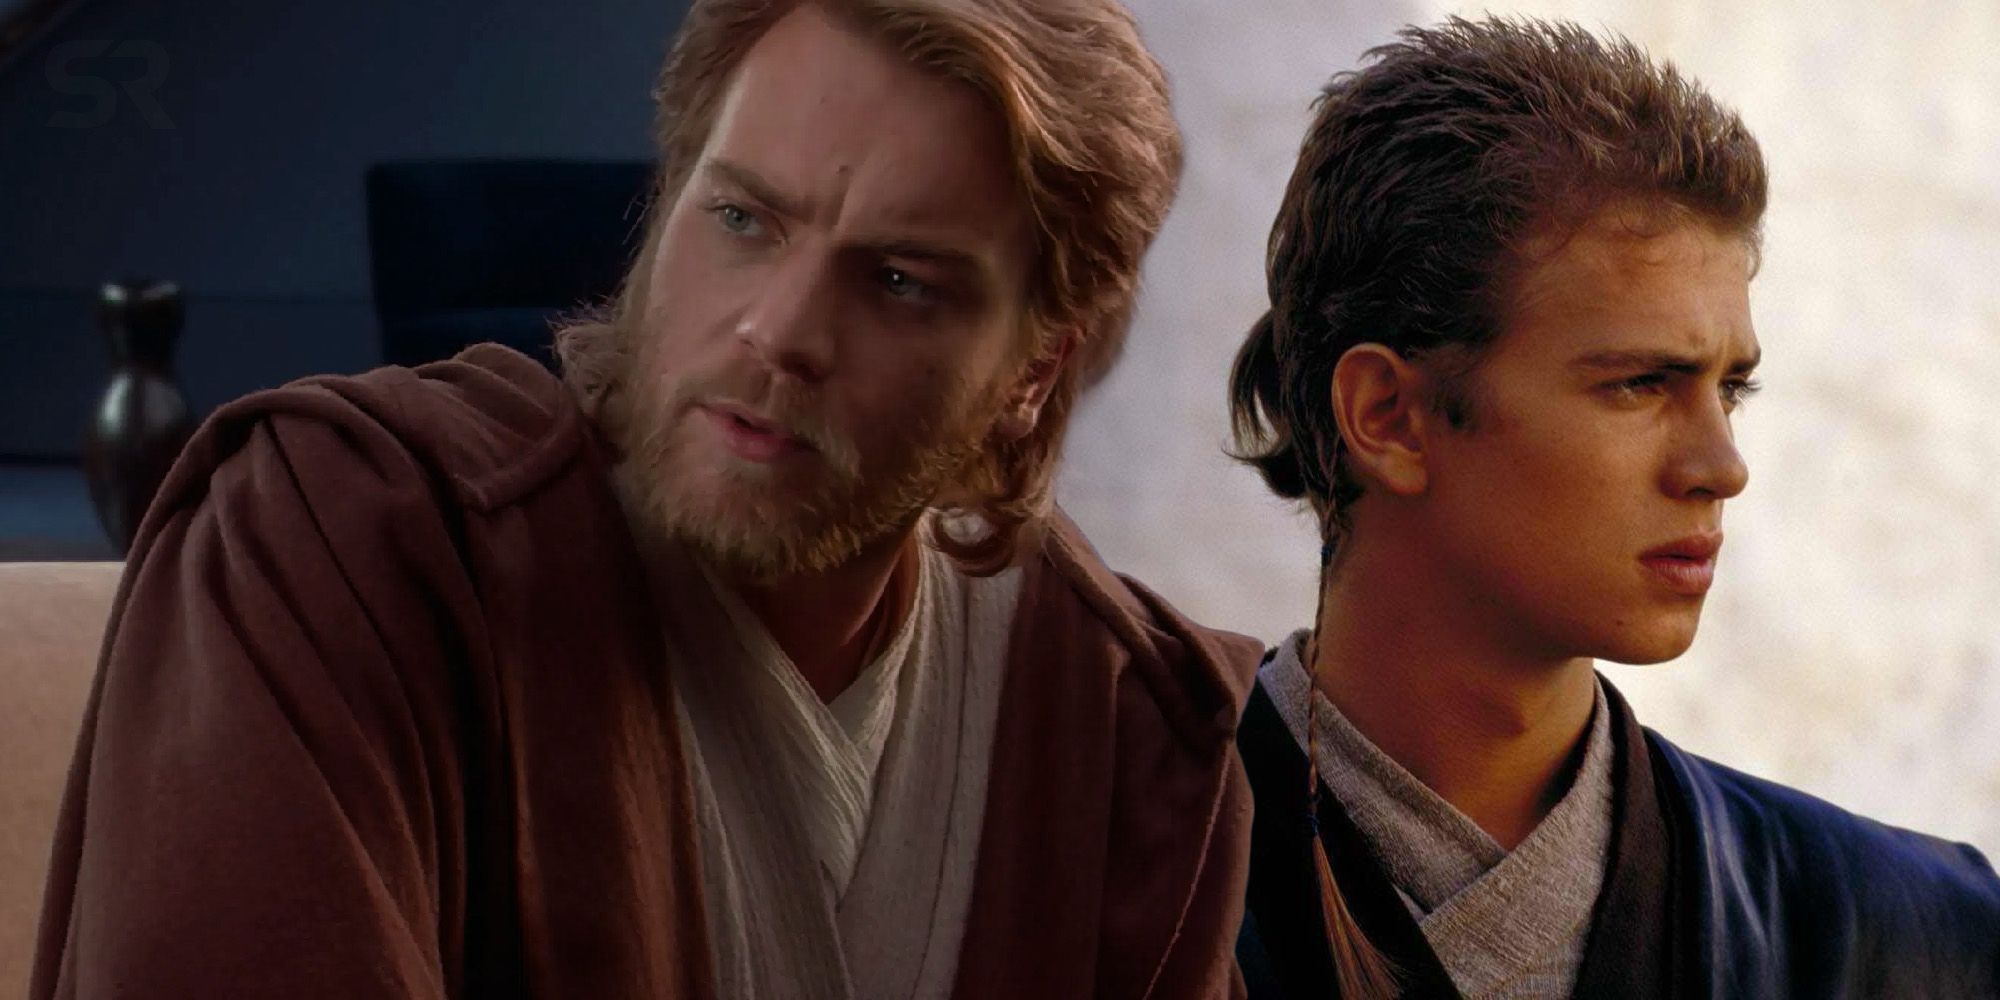 obi wan and anakin in star wars attack of the clones